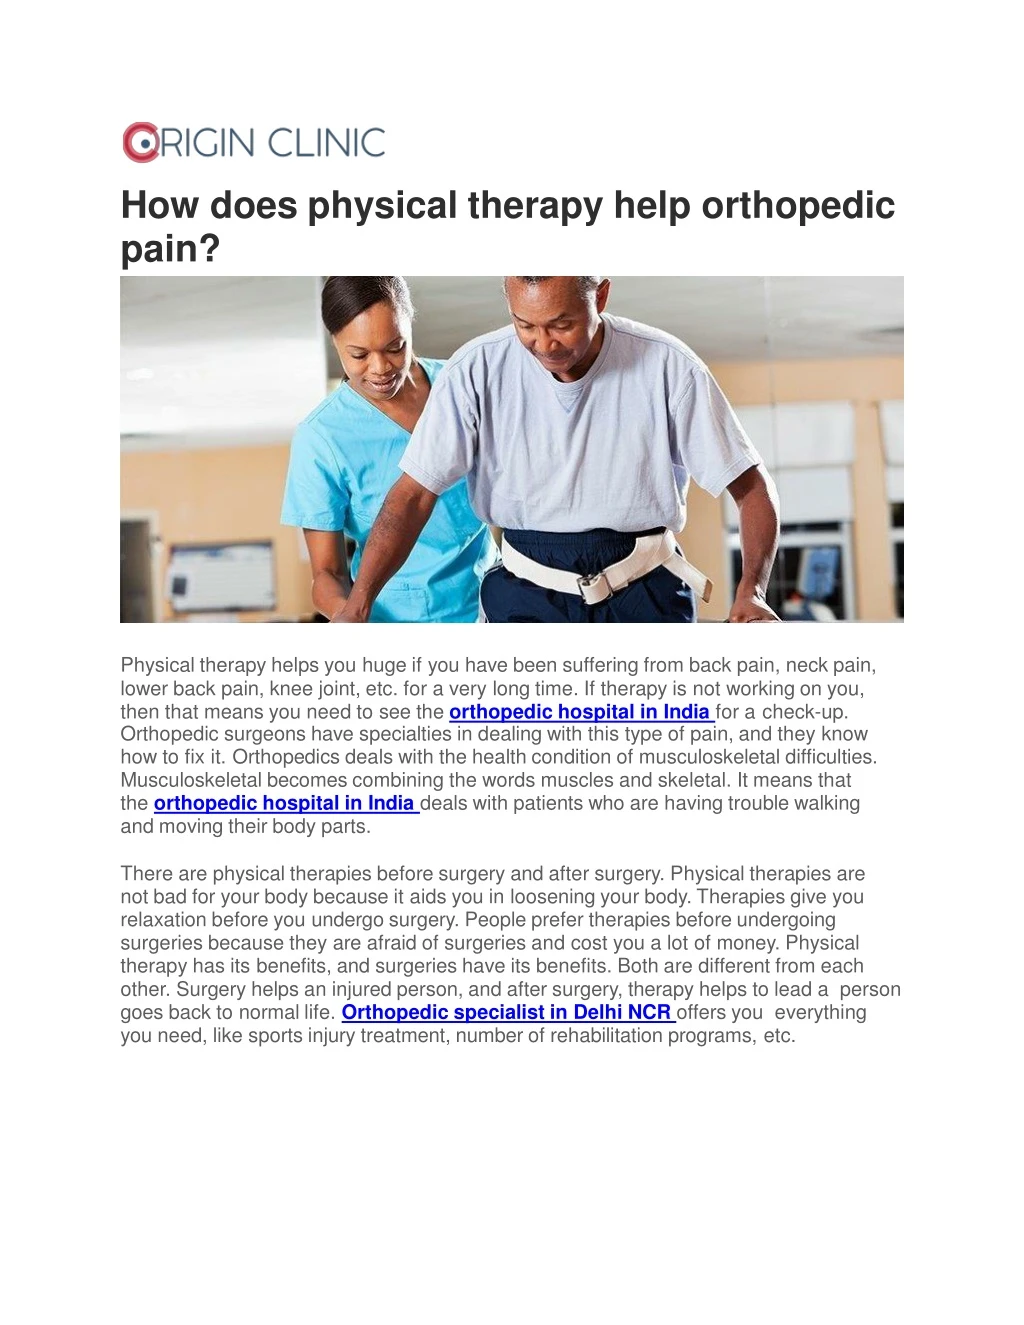 how does physical therapy help orthopedic pain